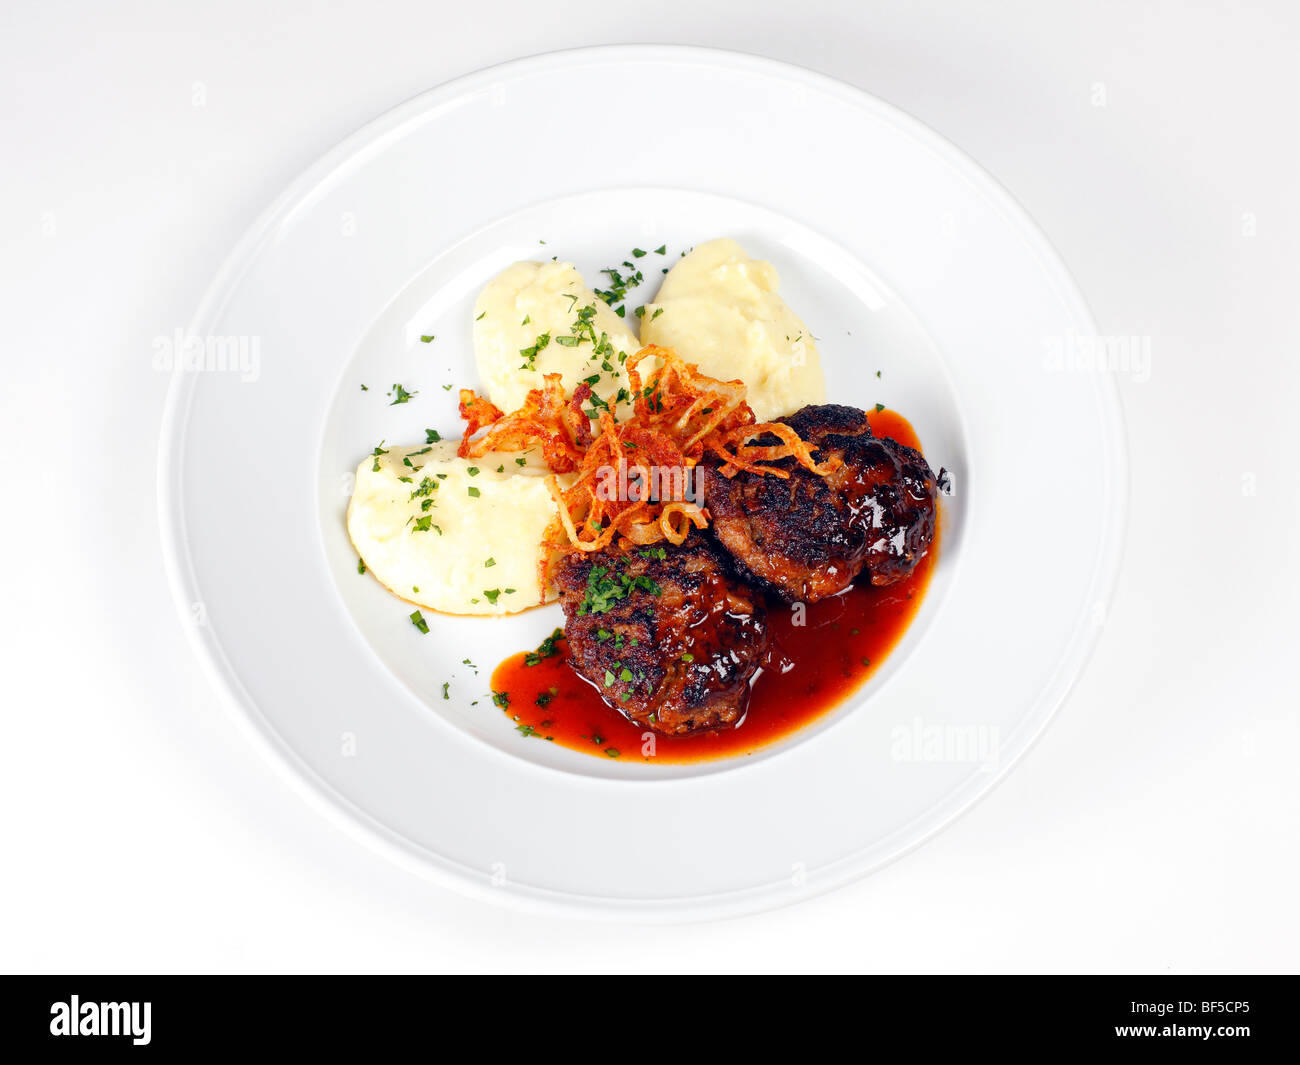 Faschierte Laibchen, meat balls with mashed potatoes Stock Photo